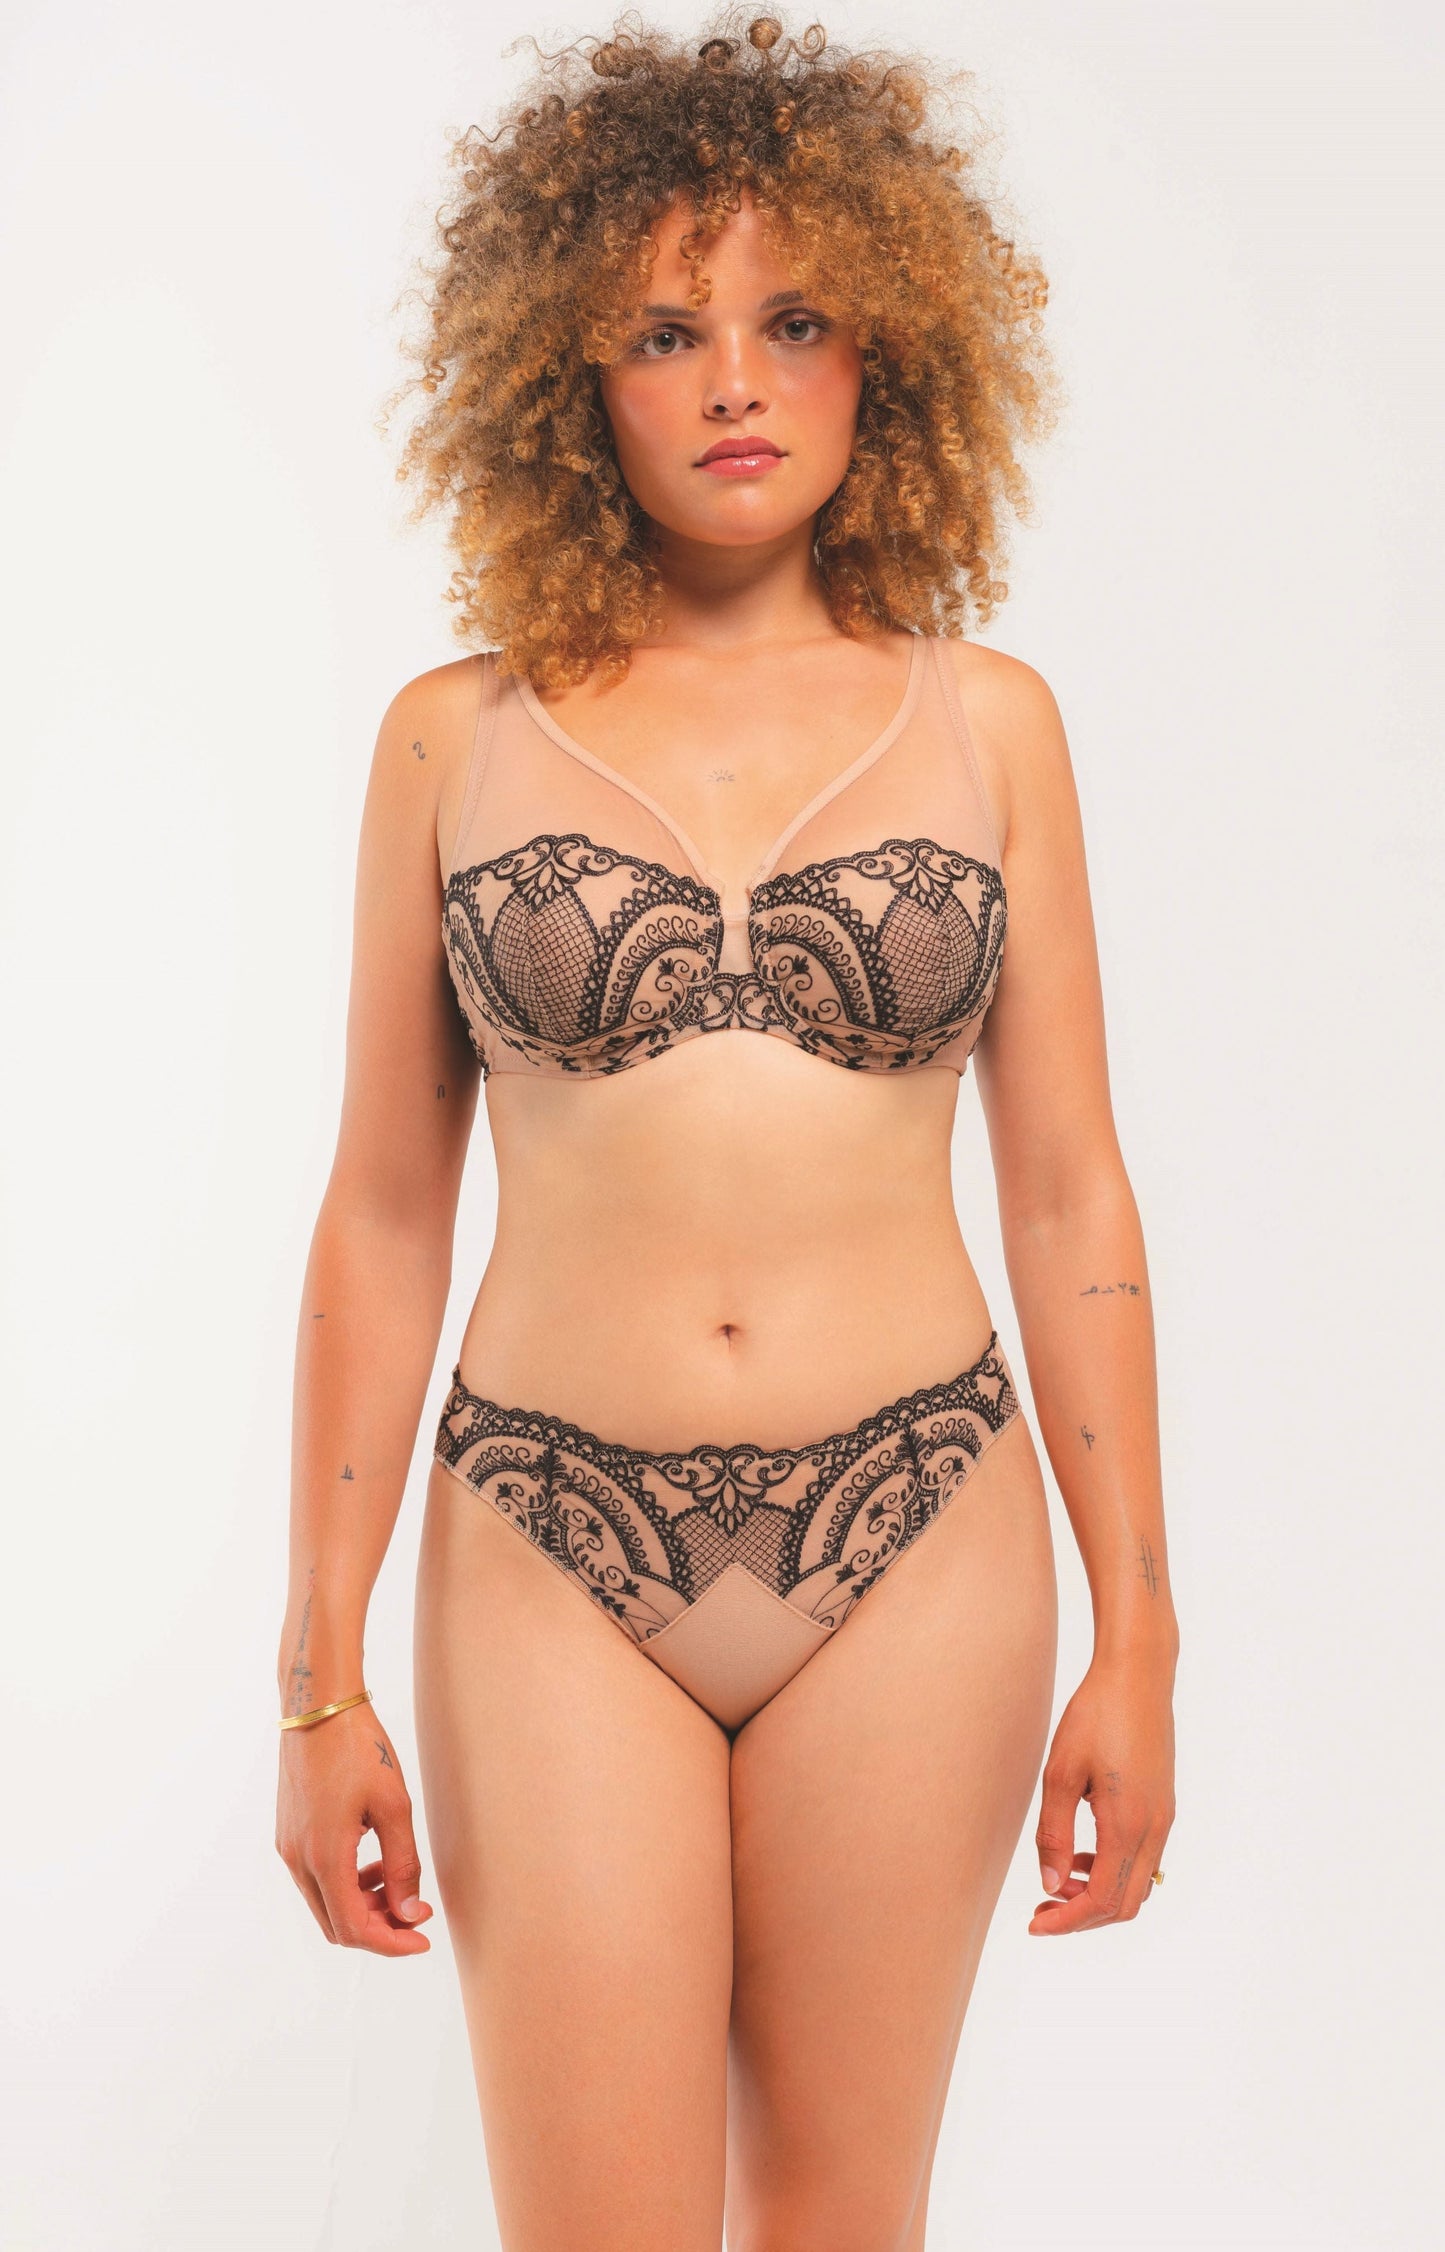 Luxuriously embroidered foulard bra and brief by Louisa Bracq, Paris at DiModa Lingerie Toronto.